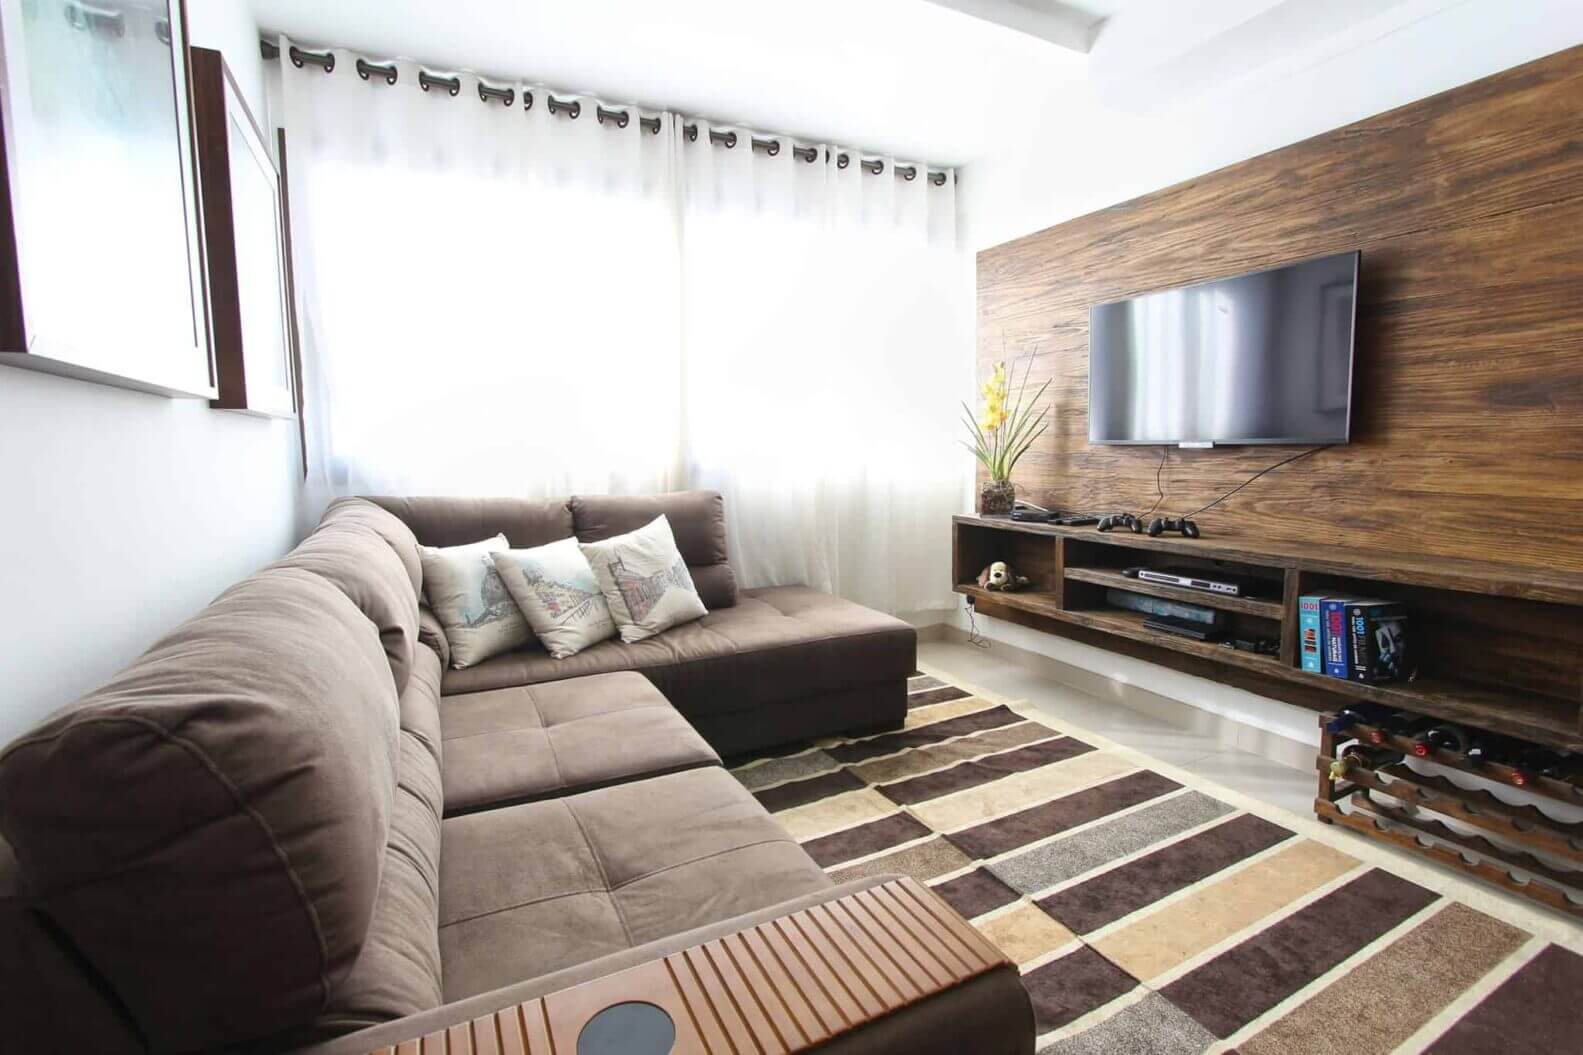 Contact Us Today, And Enjoy The Best TV Wall Mount Installation At Affordable Rates